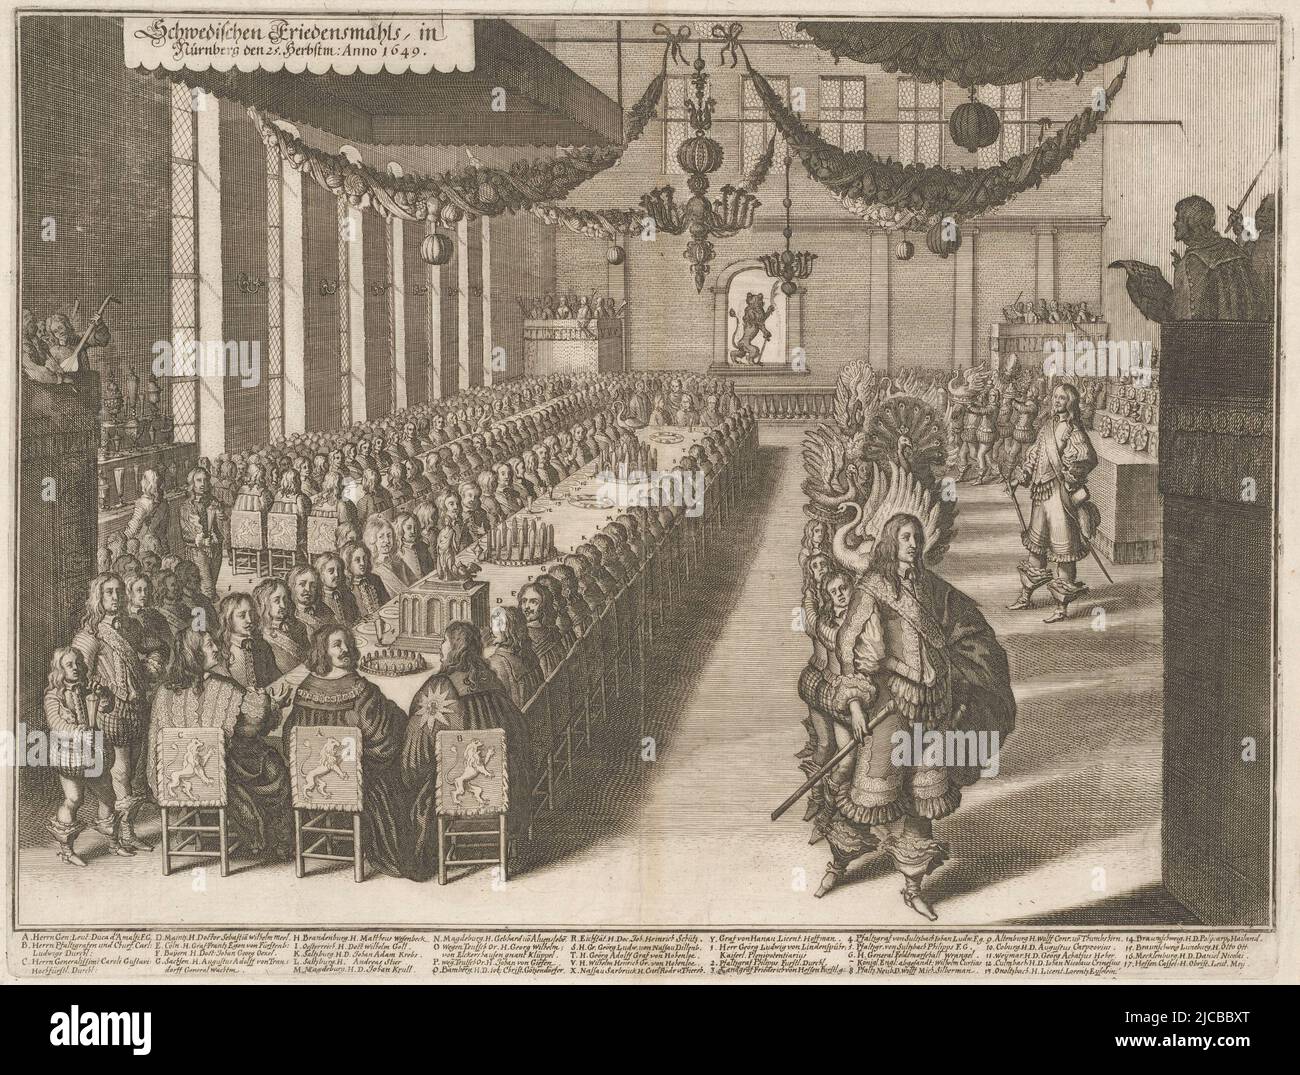 Banquet offered by the Swedish Commander-in-Chief and later King Karl Gustav, in Nuremberg on the occasion of the Peace of Westphalia, 25 September 1649 The guests seated at long tables in the hall of the Council House Below are the names of those seated at the first table The dishes are carried in a long procession Various bird pasties, Banquet in Nuremberg, 1649 Schwedischen Friedensmahls, in Nuremberg den 25 herbstm: Anno 1649, print maker: anonymous, print maker: Matthäus Merian, (possibly), after: Joachim von Sandrart (I), (possibly), Germany, 1650 - 1663, paper, etching, engraving, h 302 Stock Photo